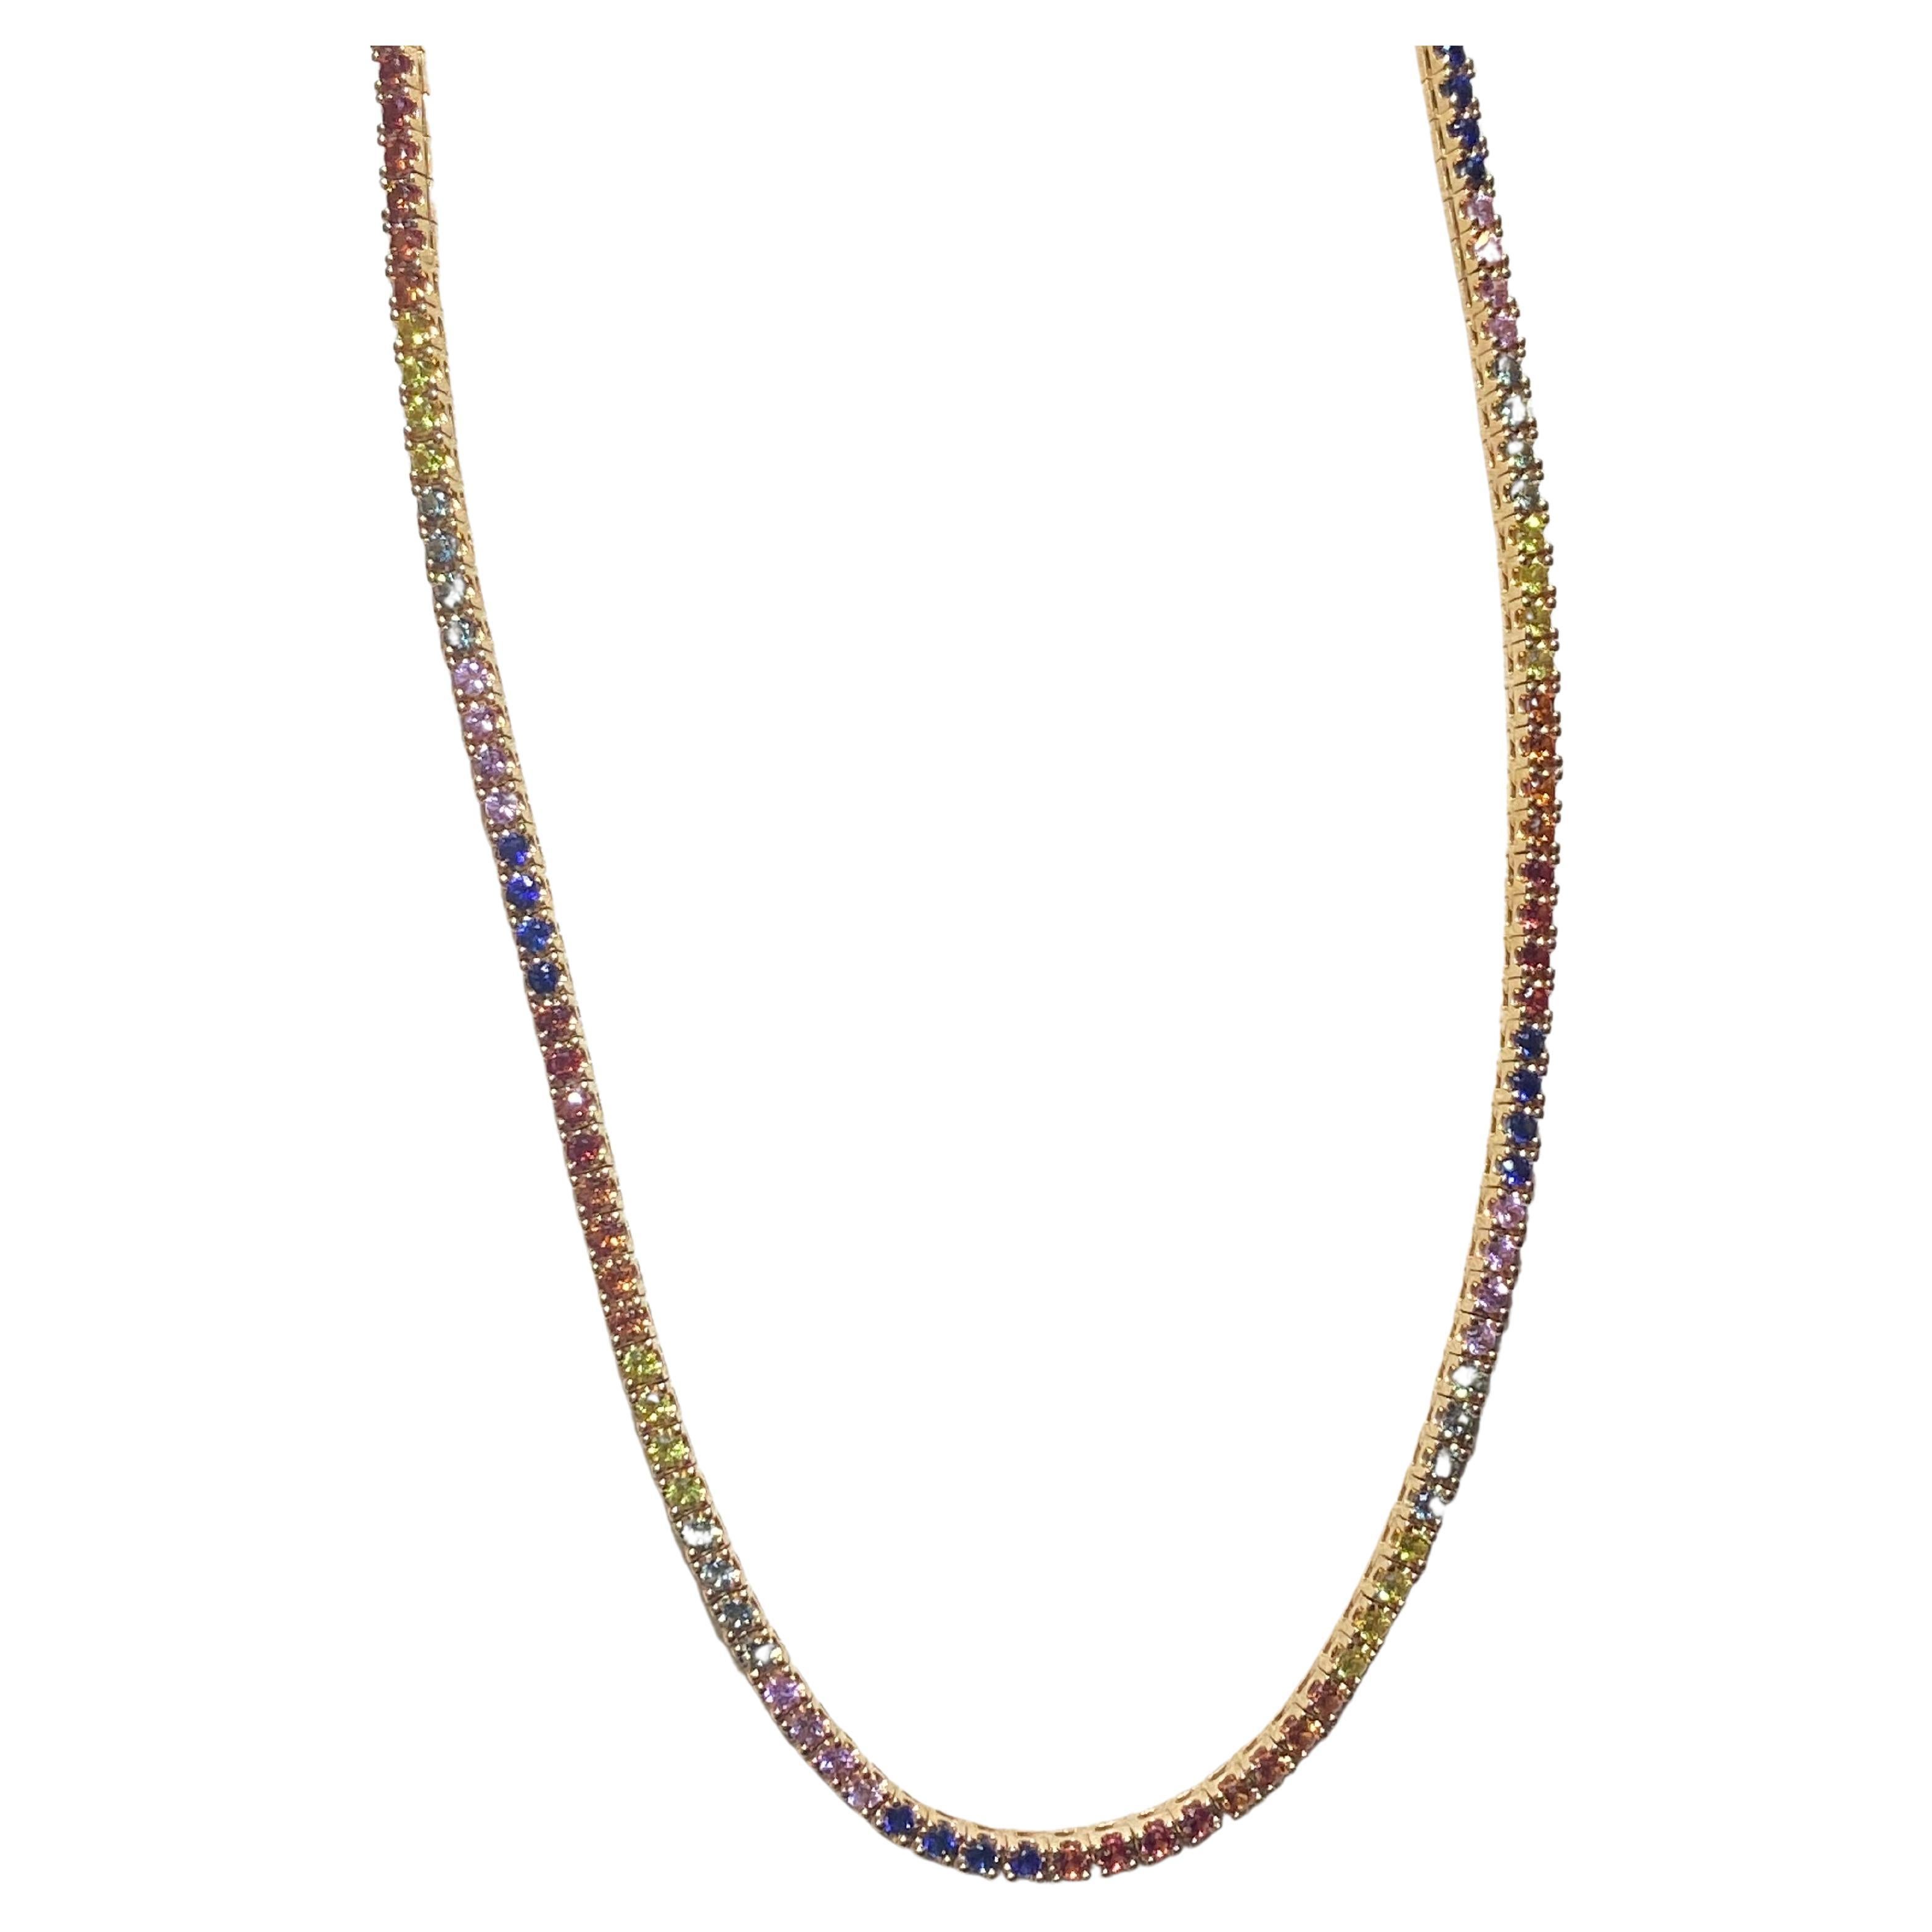 Chic Multi Sapphire Tennis Yellow 18K Gold Tennis Necklace for Her